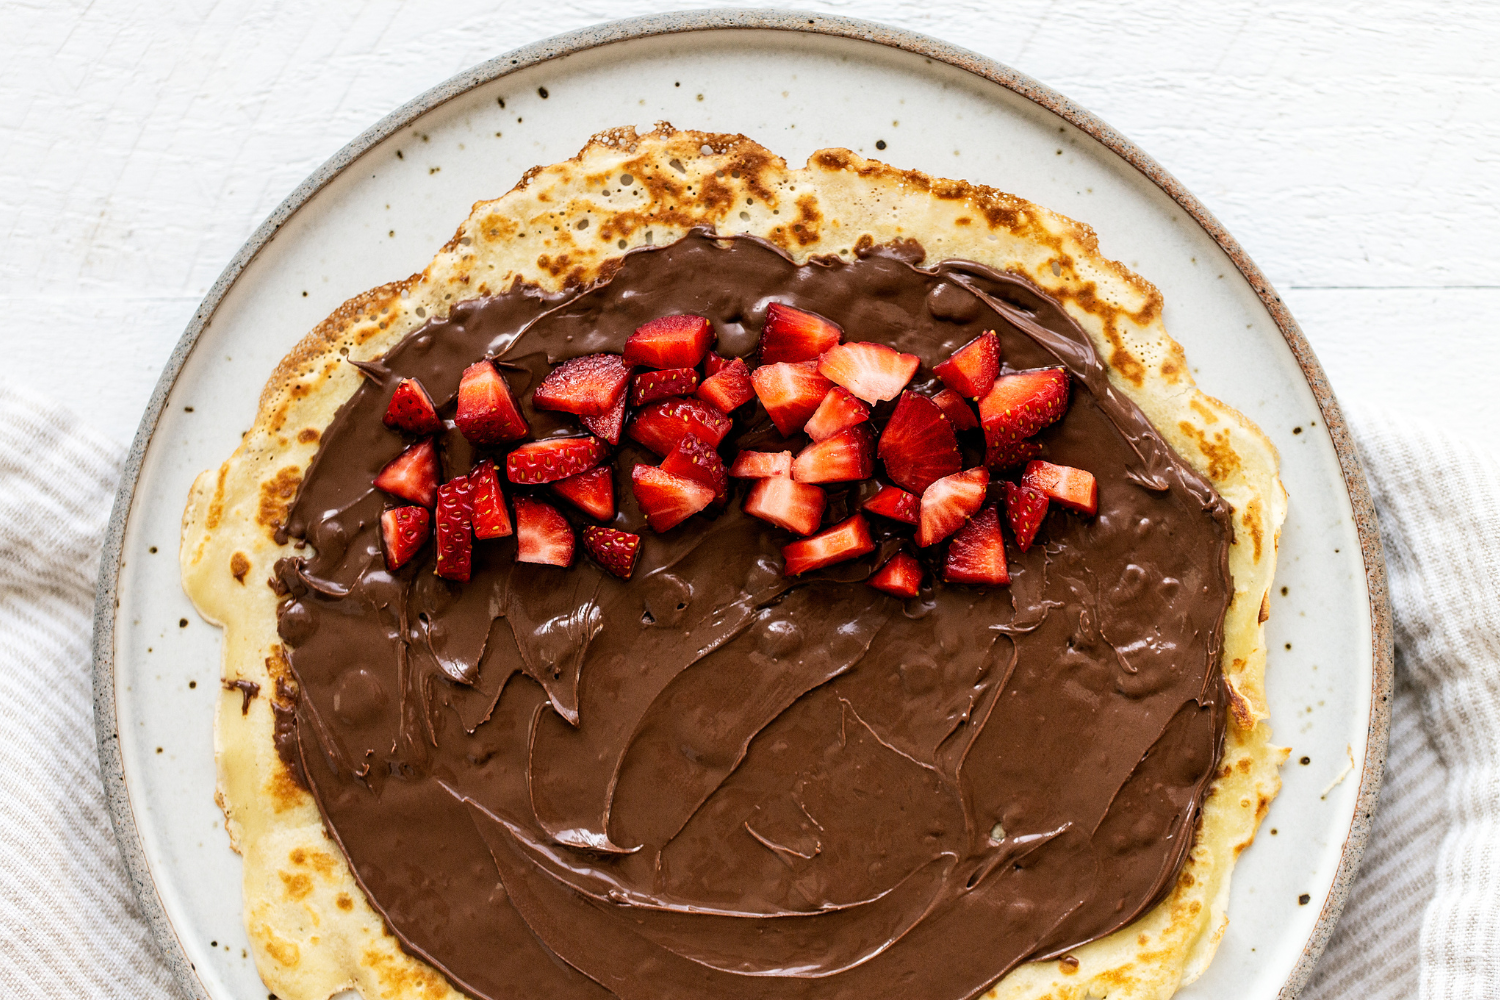 filled with chocolate and fresh strawberries, ready to roll up and serve.